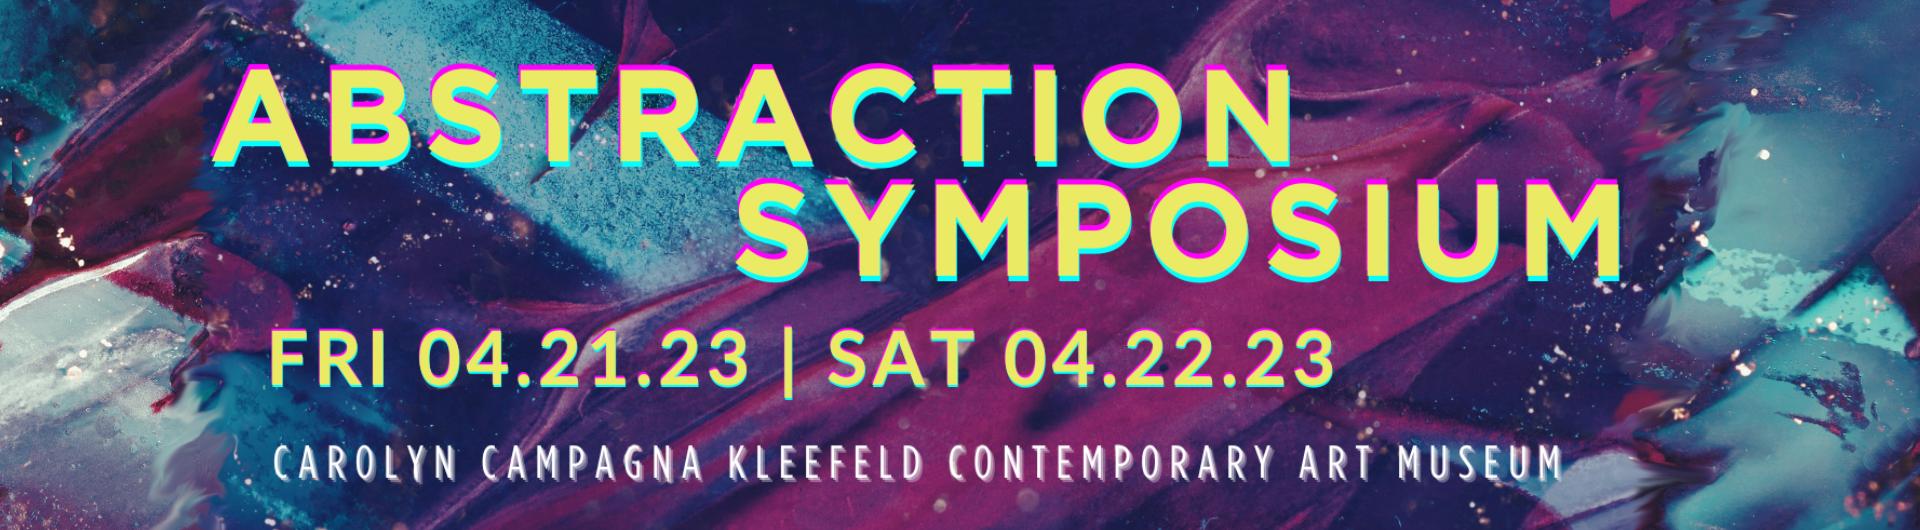 abstraction symposium banner